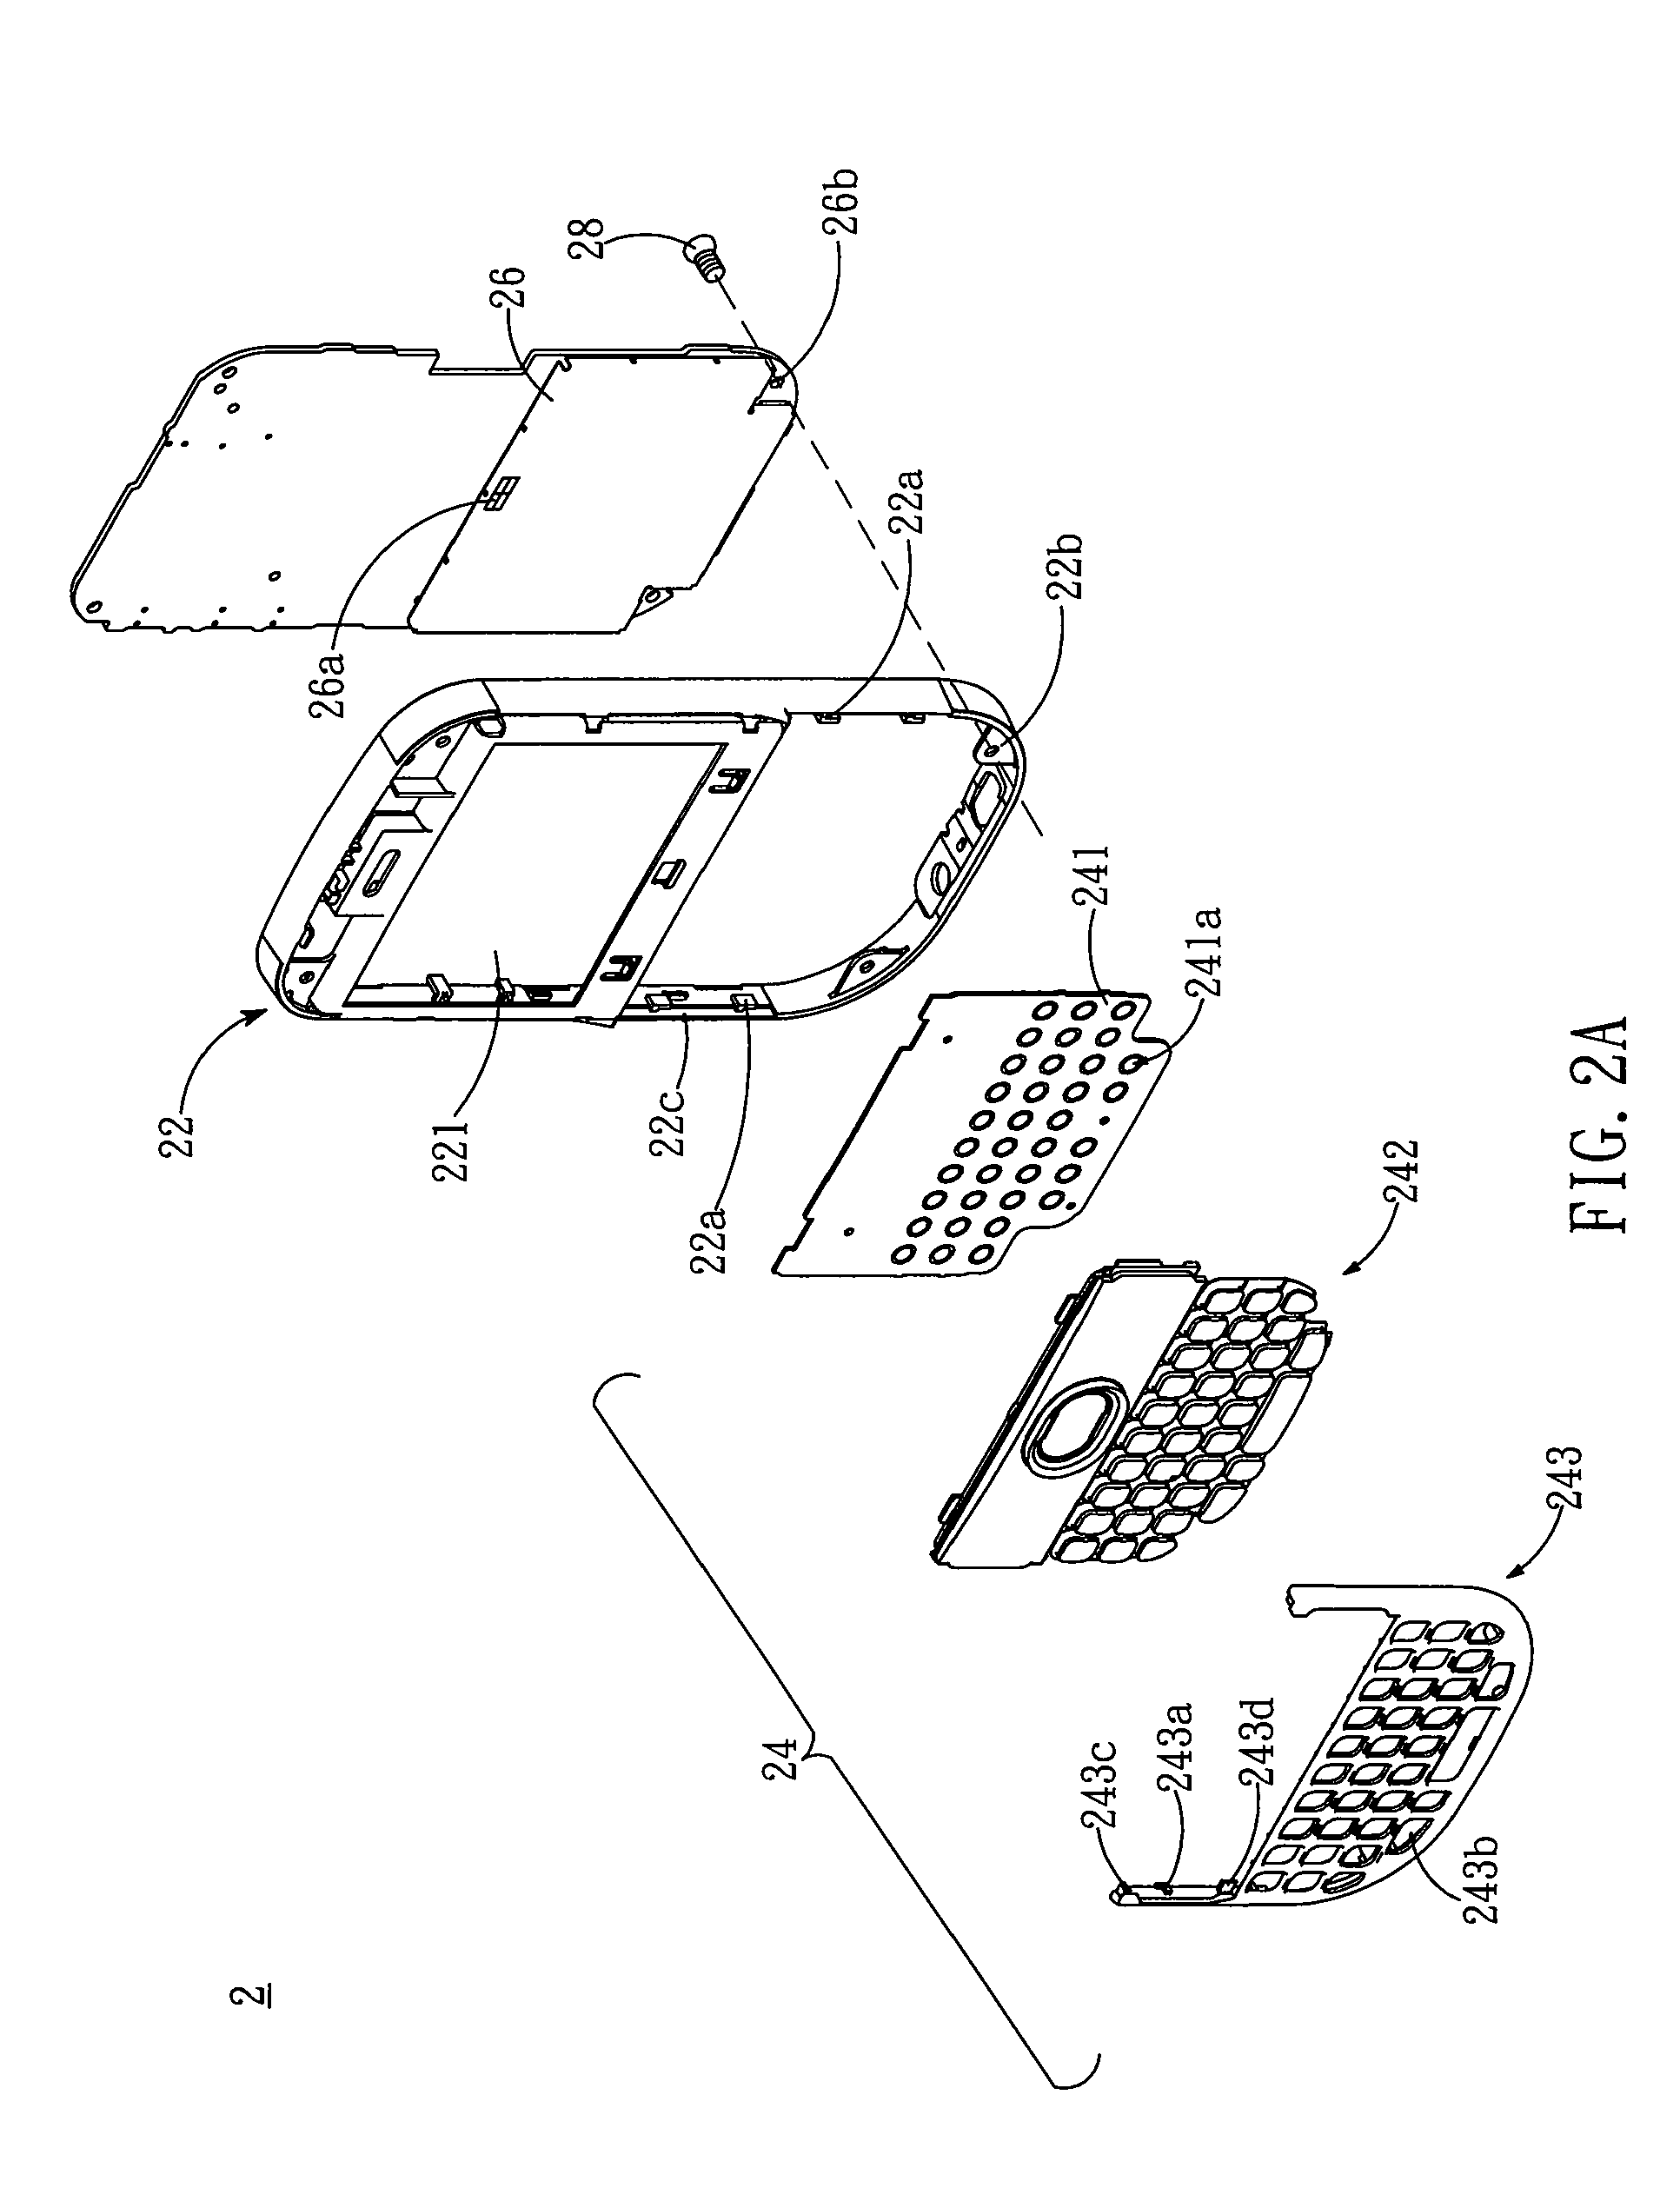 Electronic device with detachable keypad module